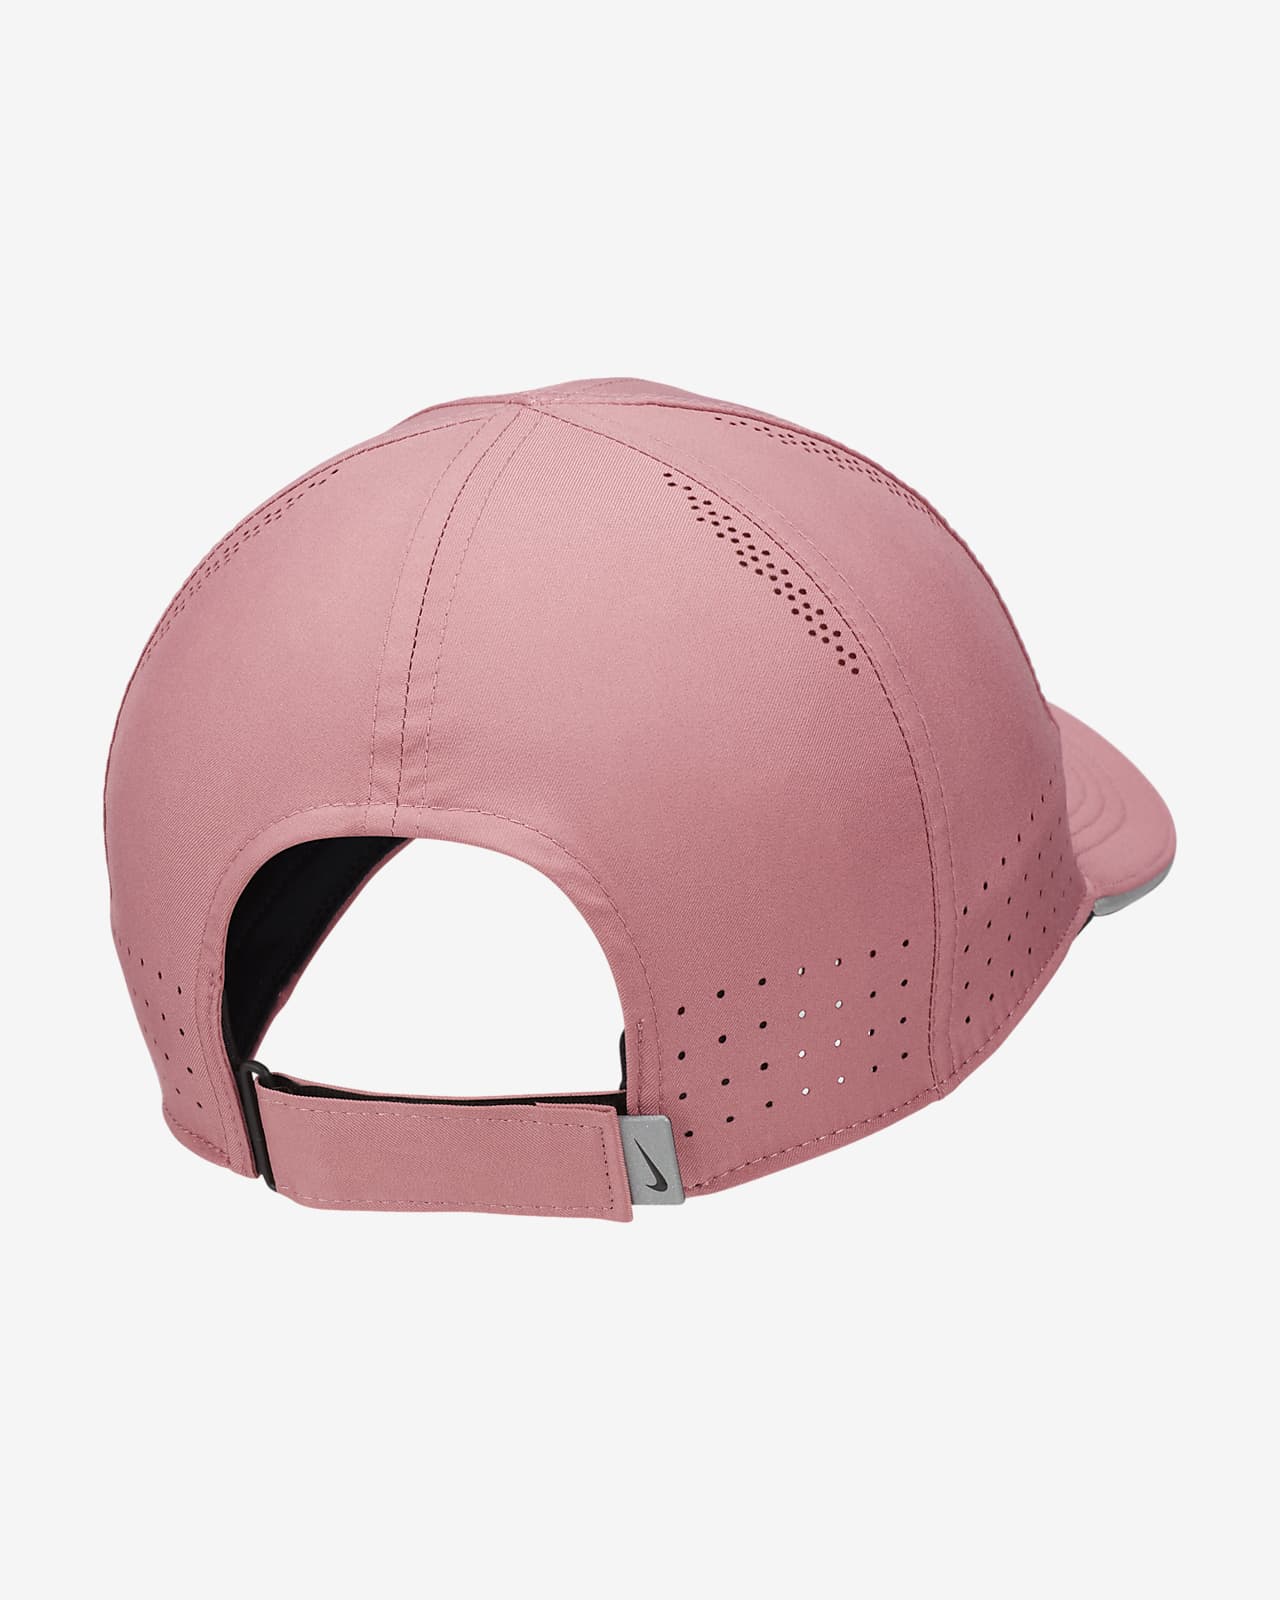 Nike Dri-fit Aerobill Reflective Cap Filed to:DC3598-010 Condition: new  with tag Size:.., NIKE DRILL RESELLERS, БАРАХОЛКА